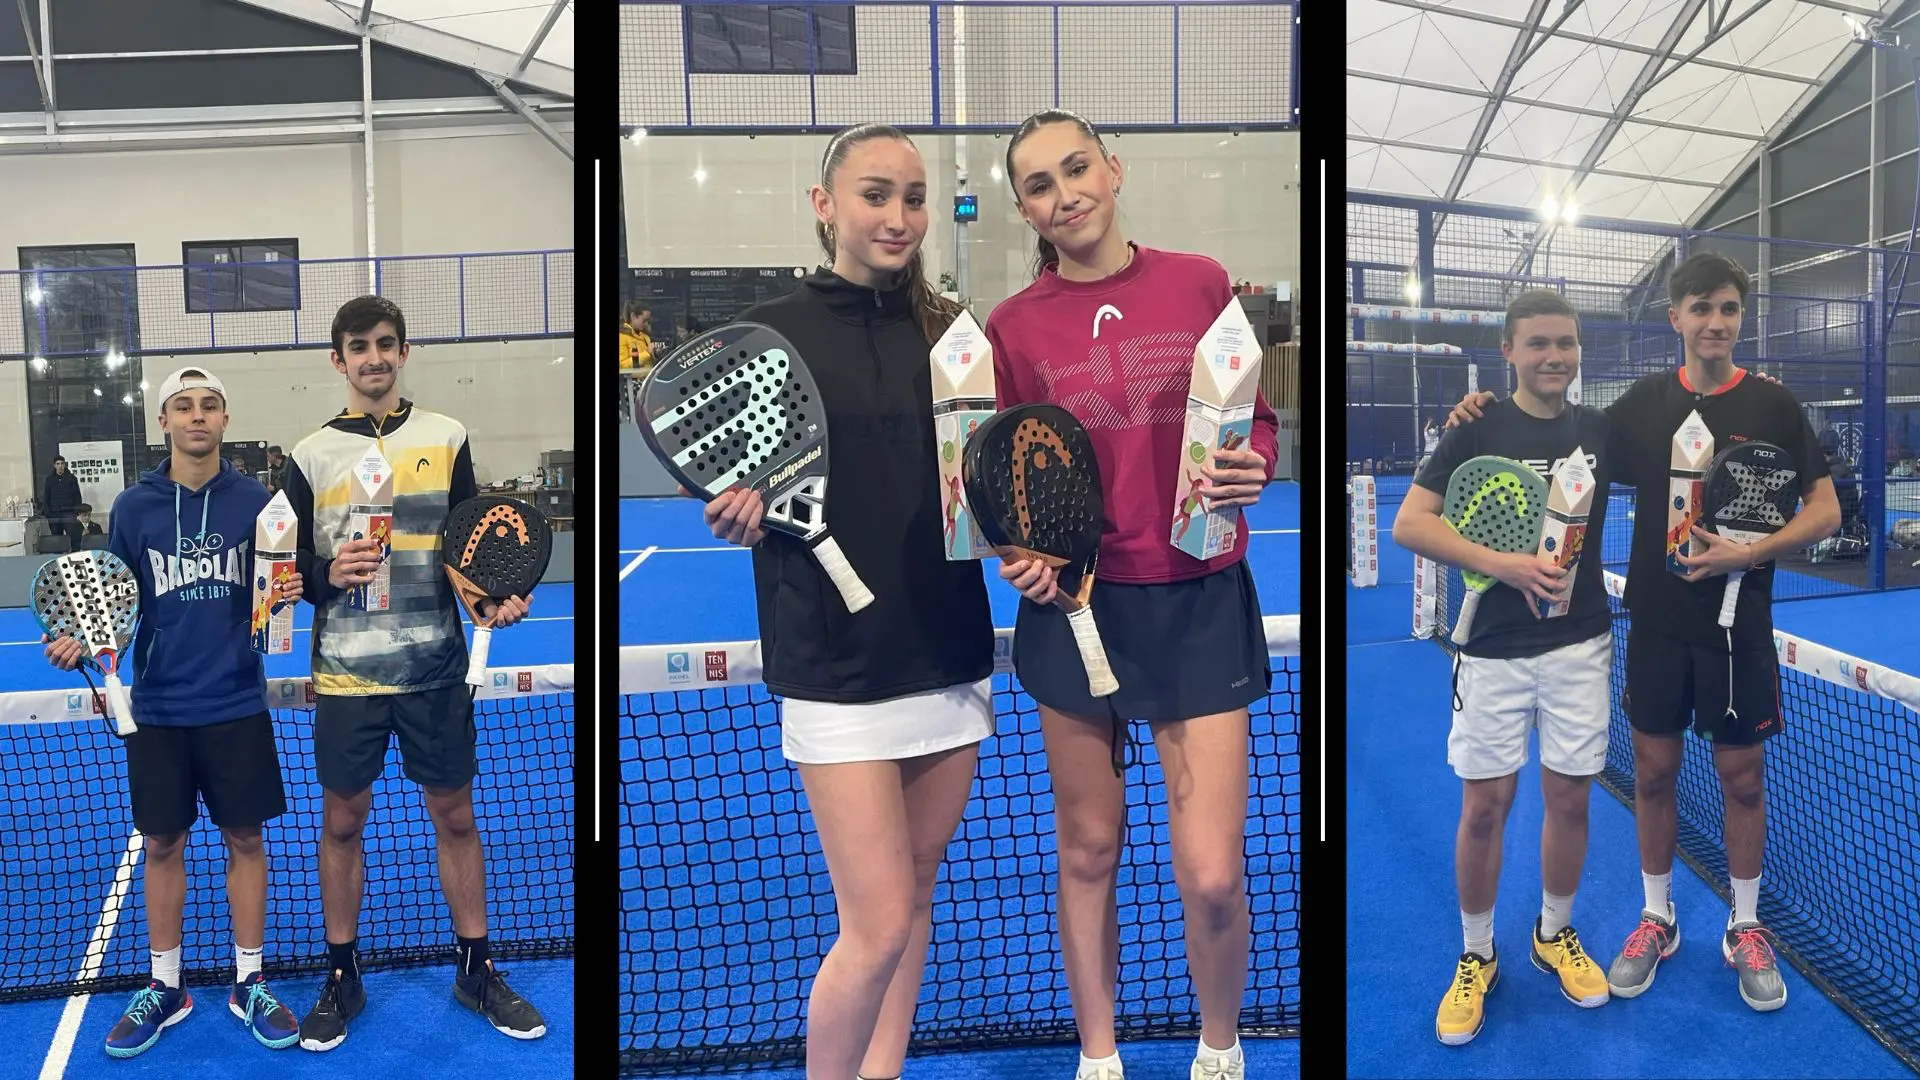 TNJ Set Padel Narbonne – The top seeds held their place!